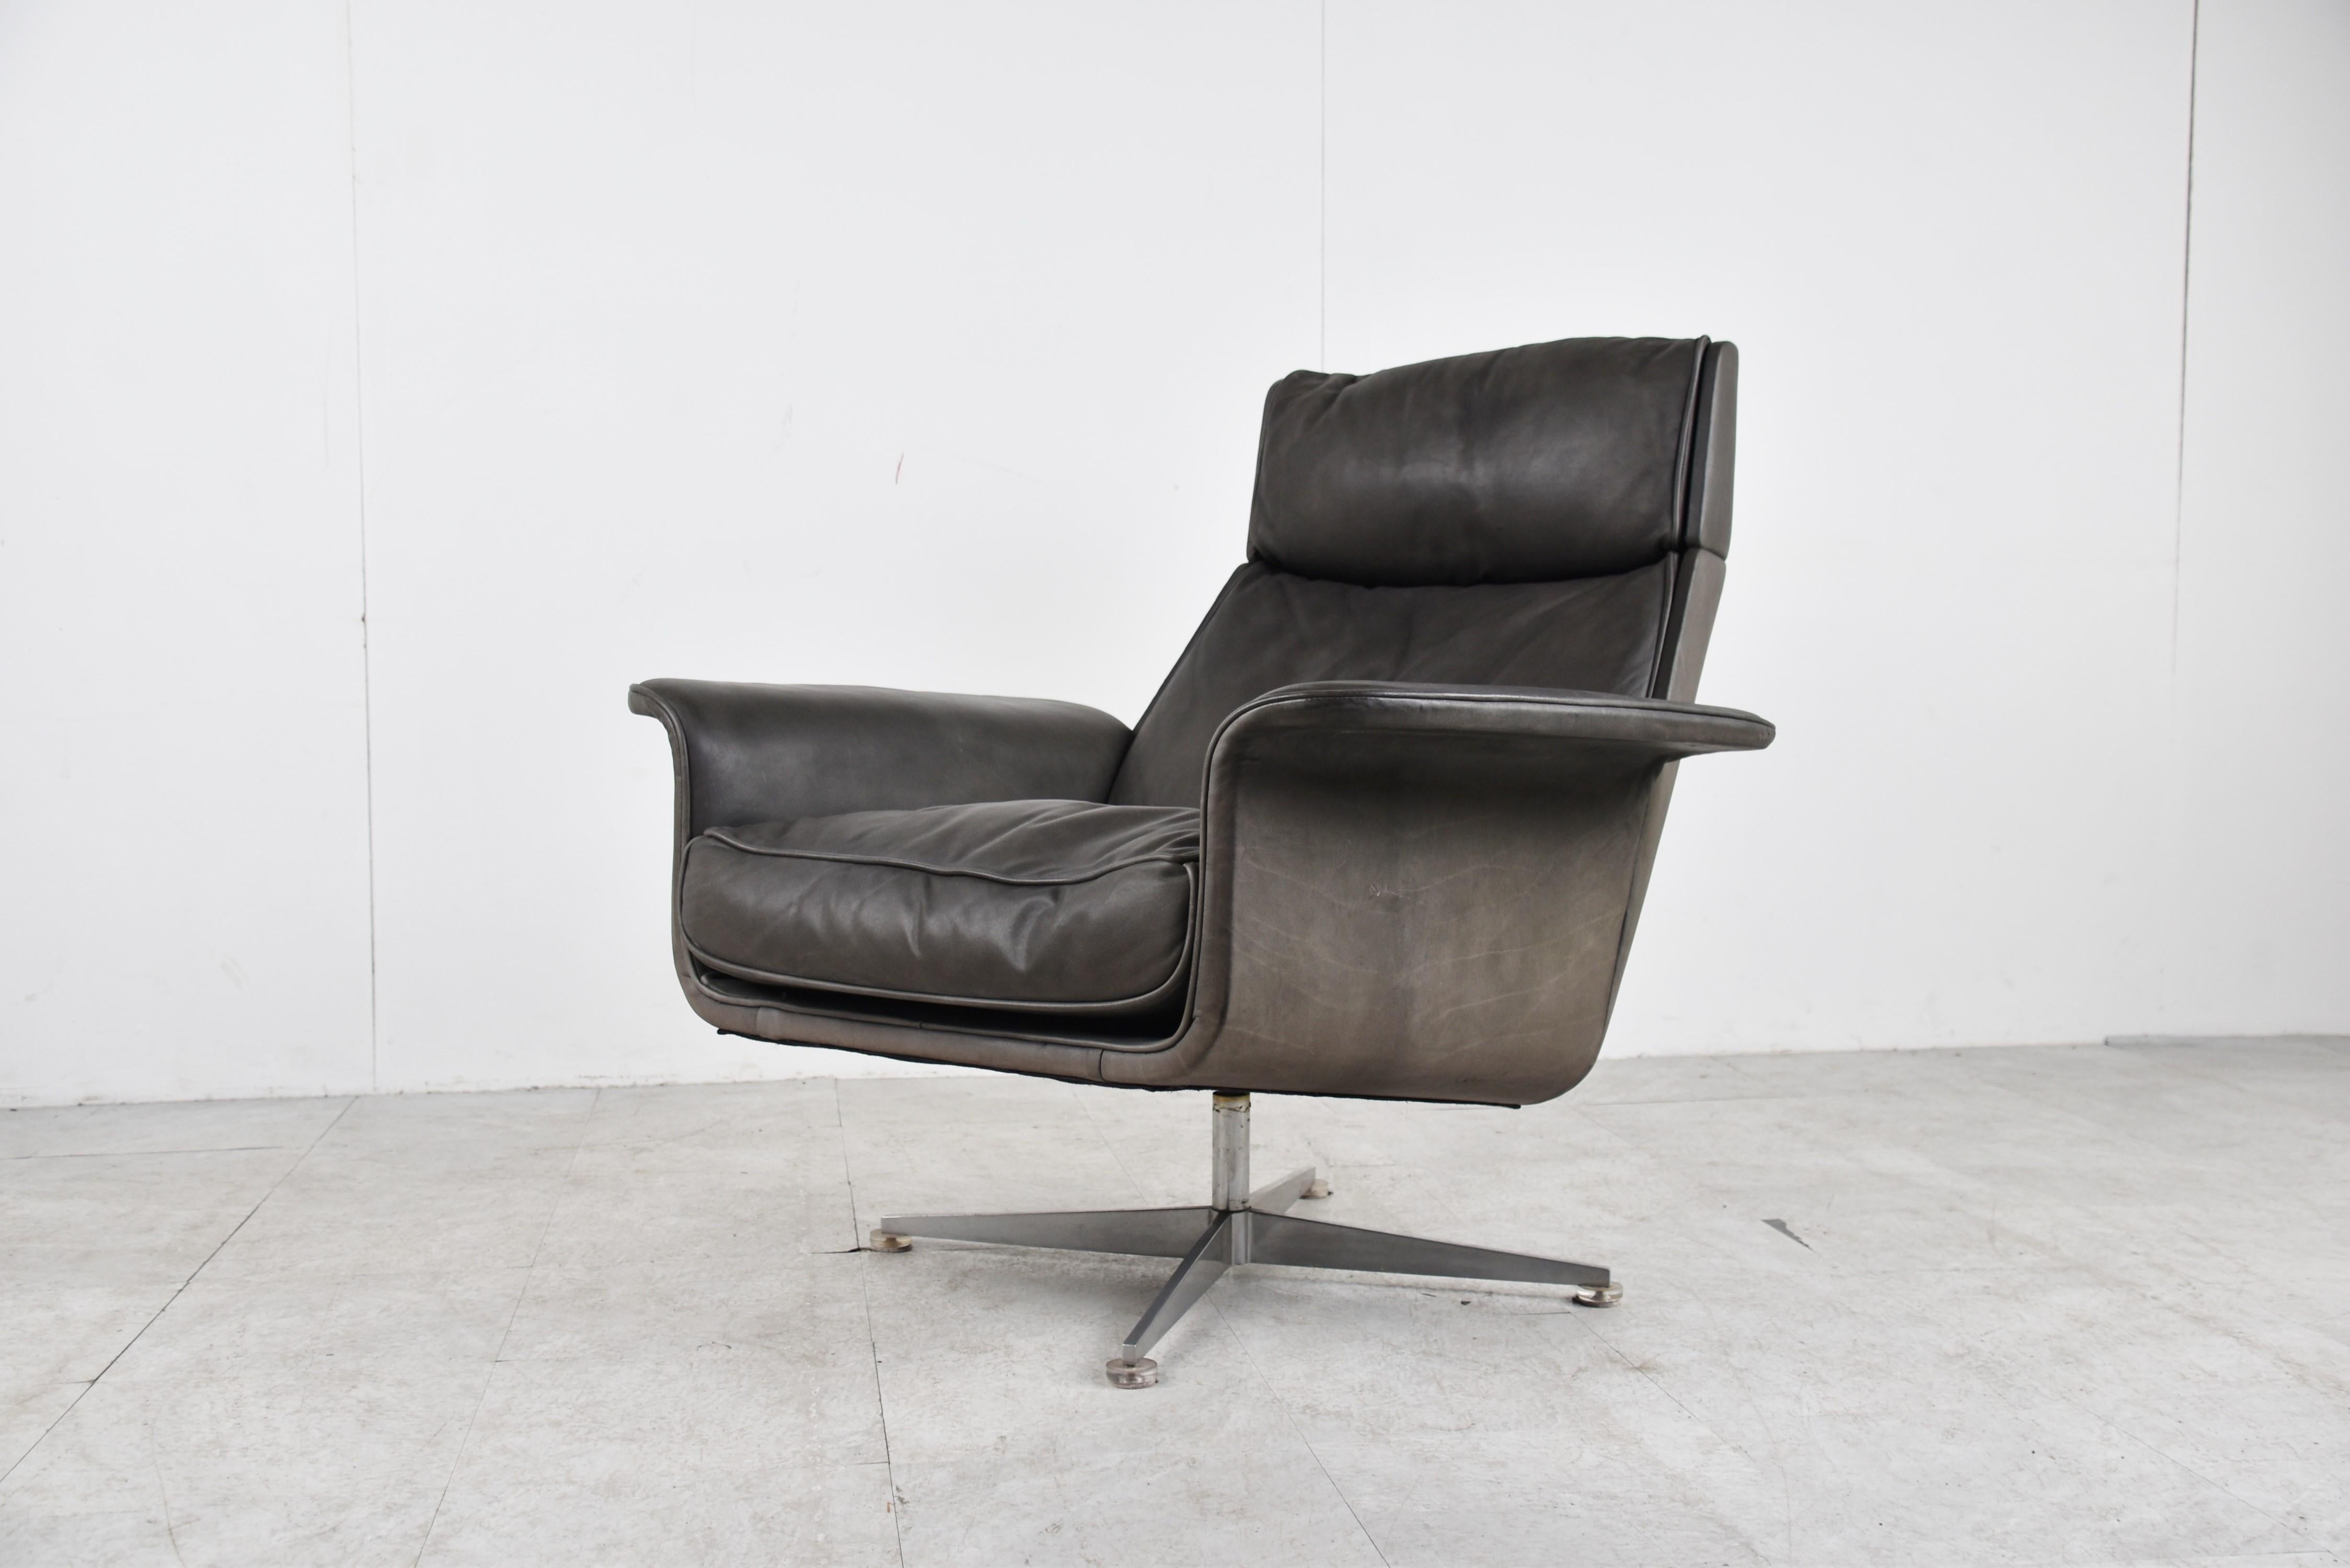 Mid-century grey leather swivel chair designed by Jacques Brule for Hans Kaufeld.

One of the most comfortable chairs we ever sat in, complete with foot stool.

Attractive timeless design, all covered in quality grey leather.

Chromed 4 legged